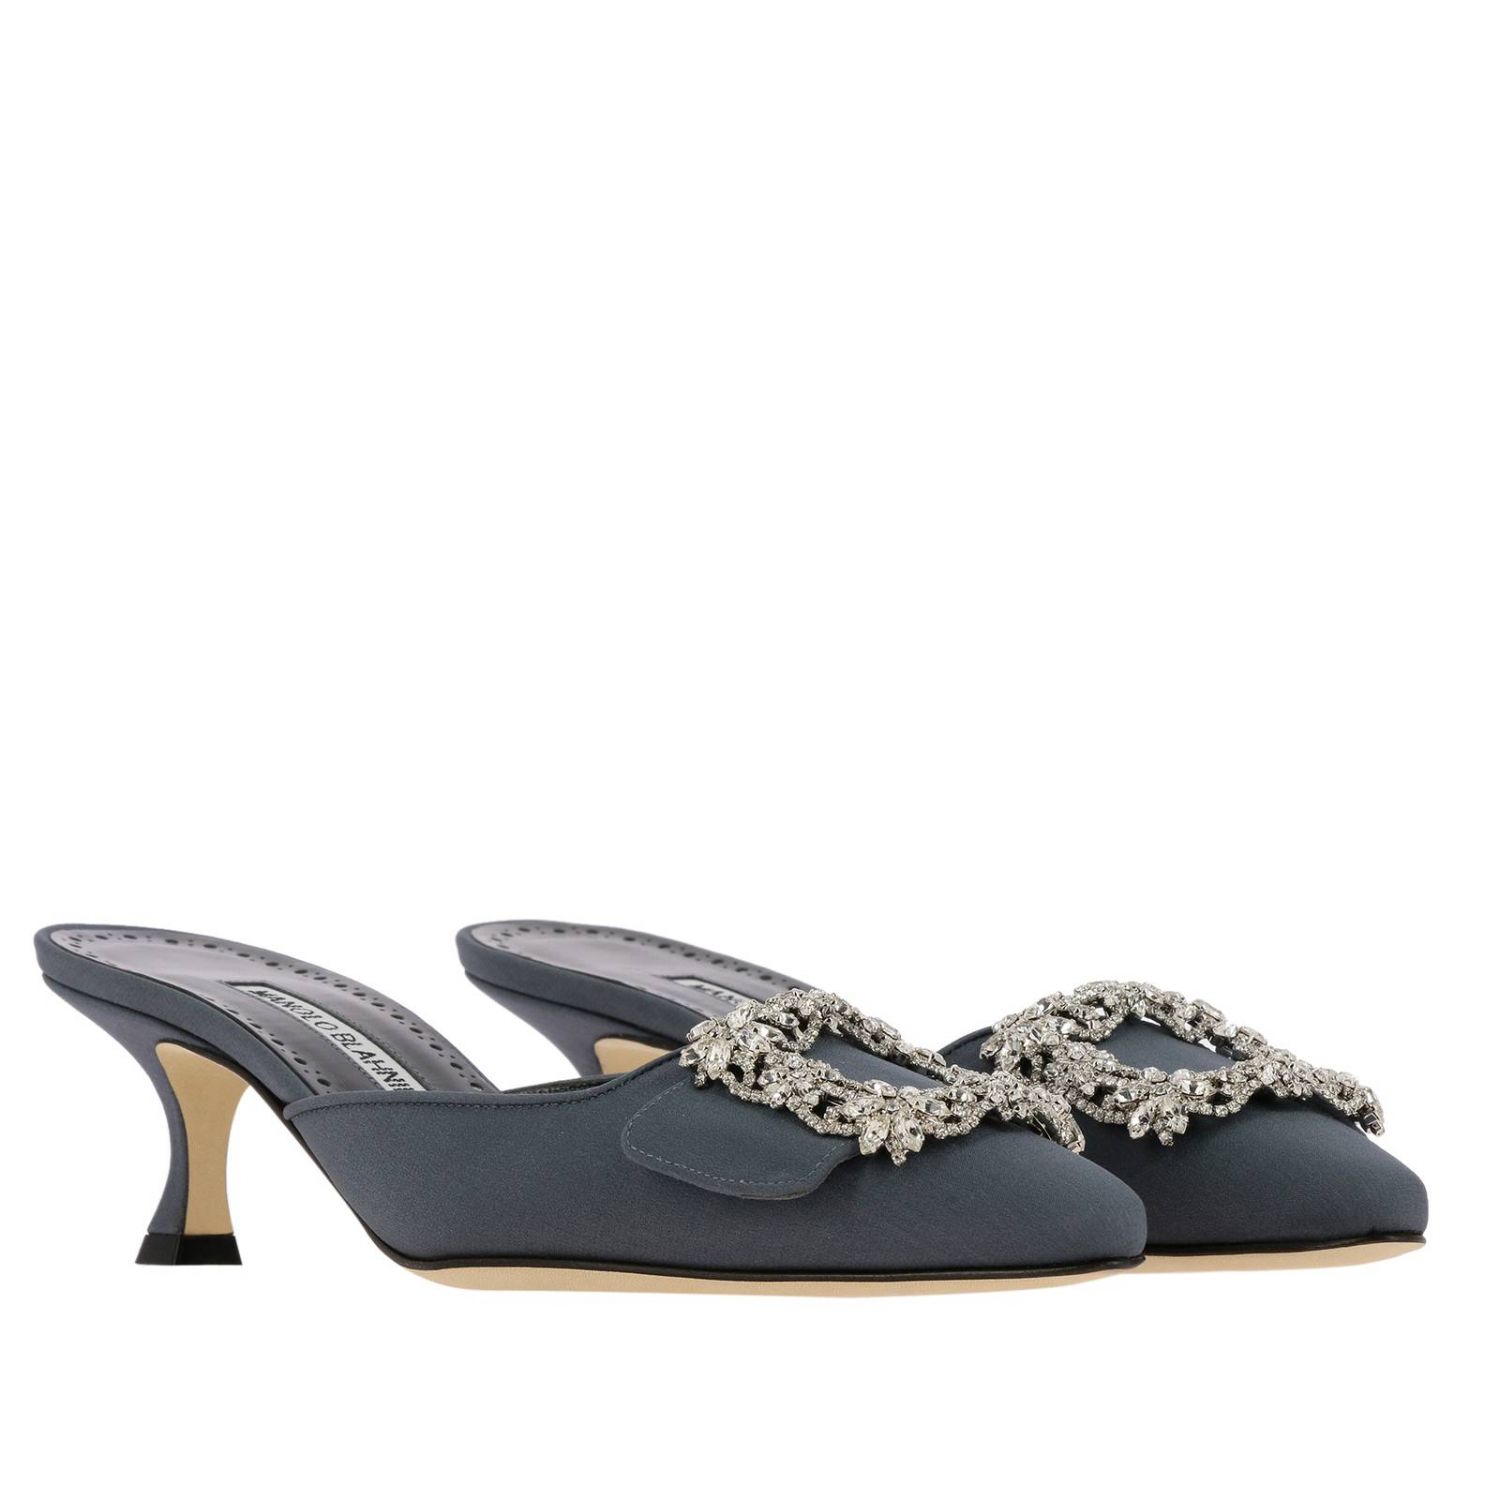 Manolo Blahnik Outlet: Maysale Mules in crepe de chine with clear ...